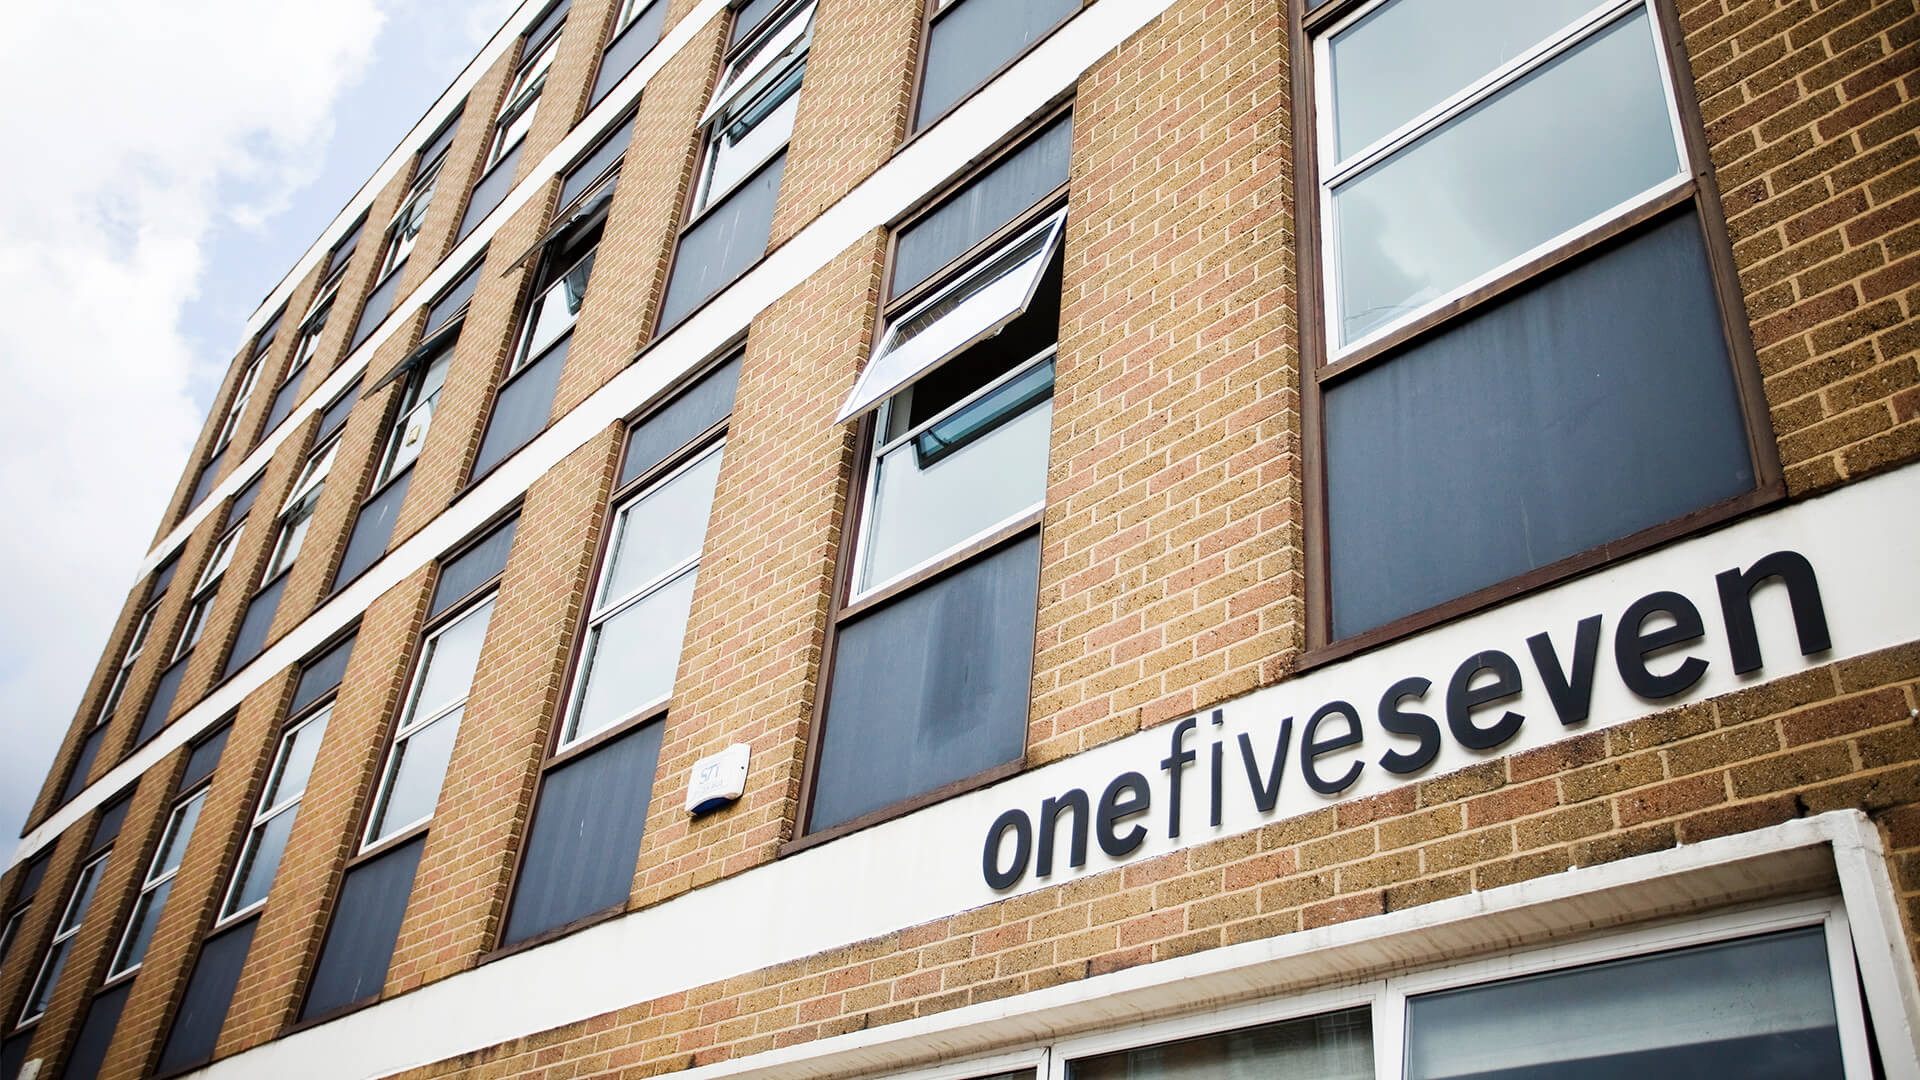 The exterior frontage of the building with a sign displaying 'onefiveseven' in raised black letters